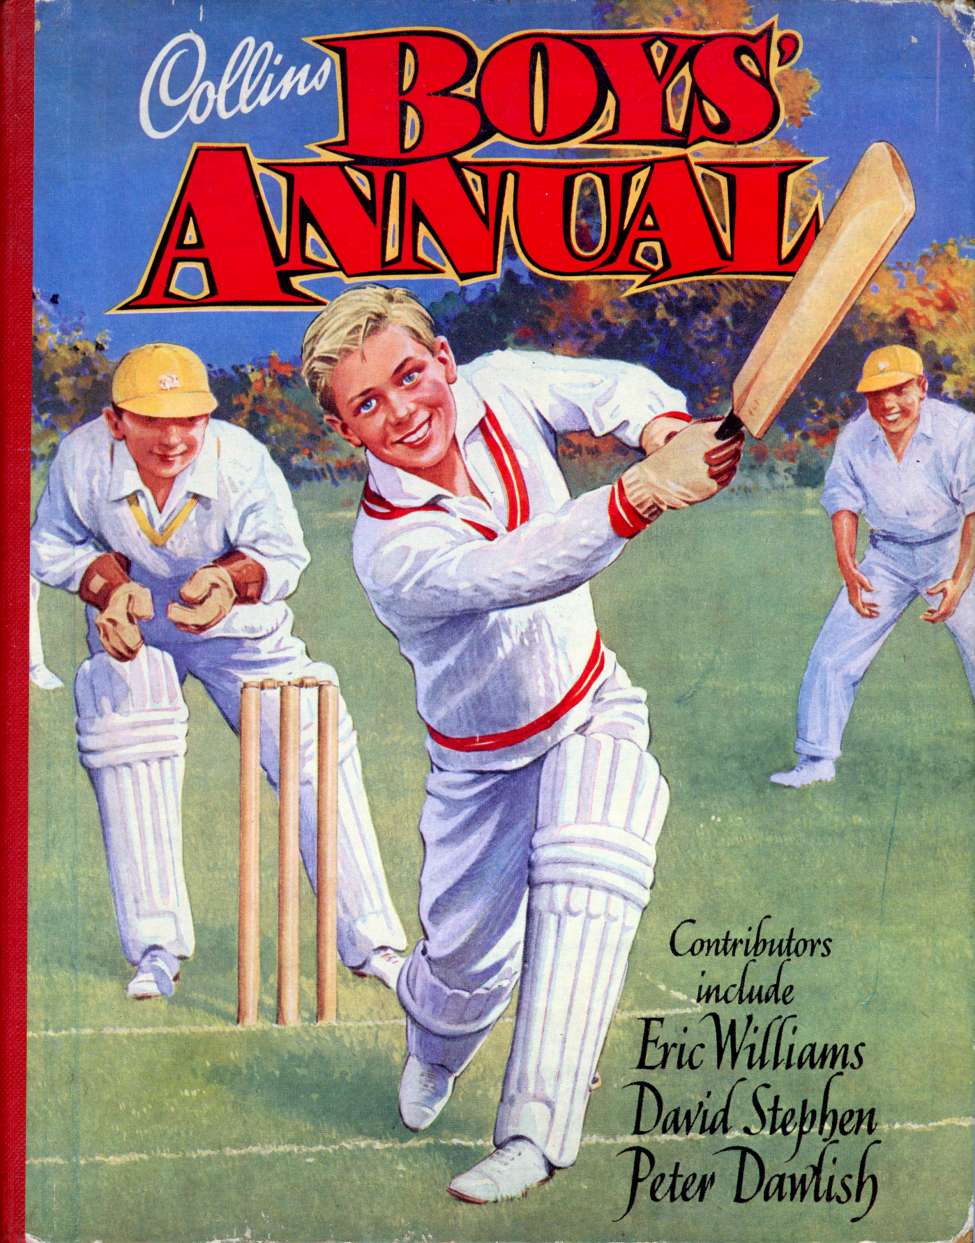 Book Cover For Collins Boys Annual c1950s